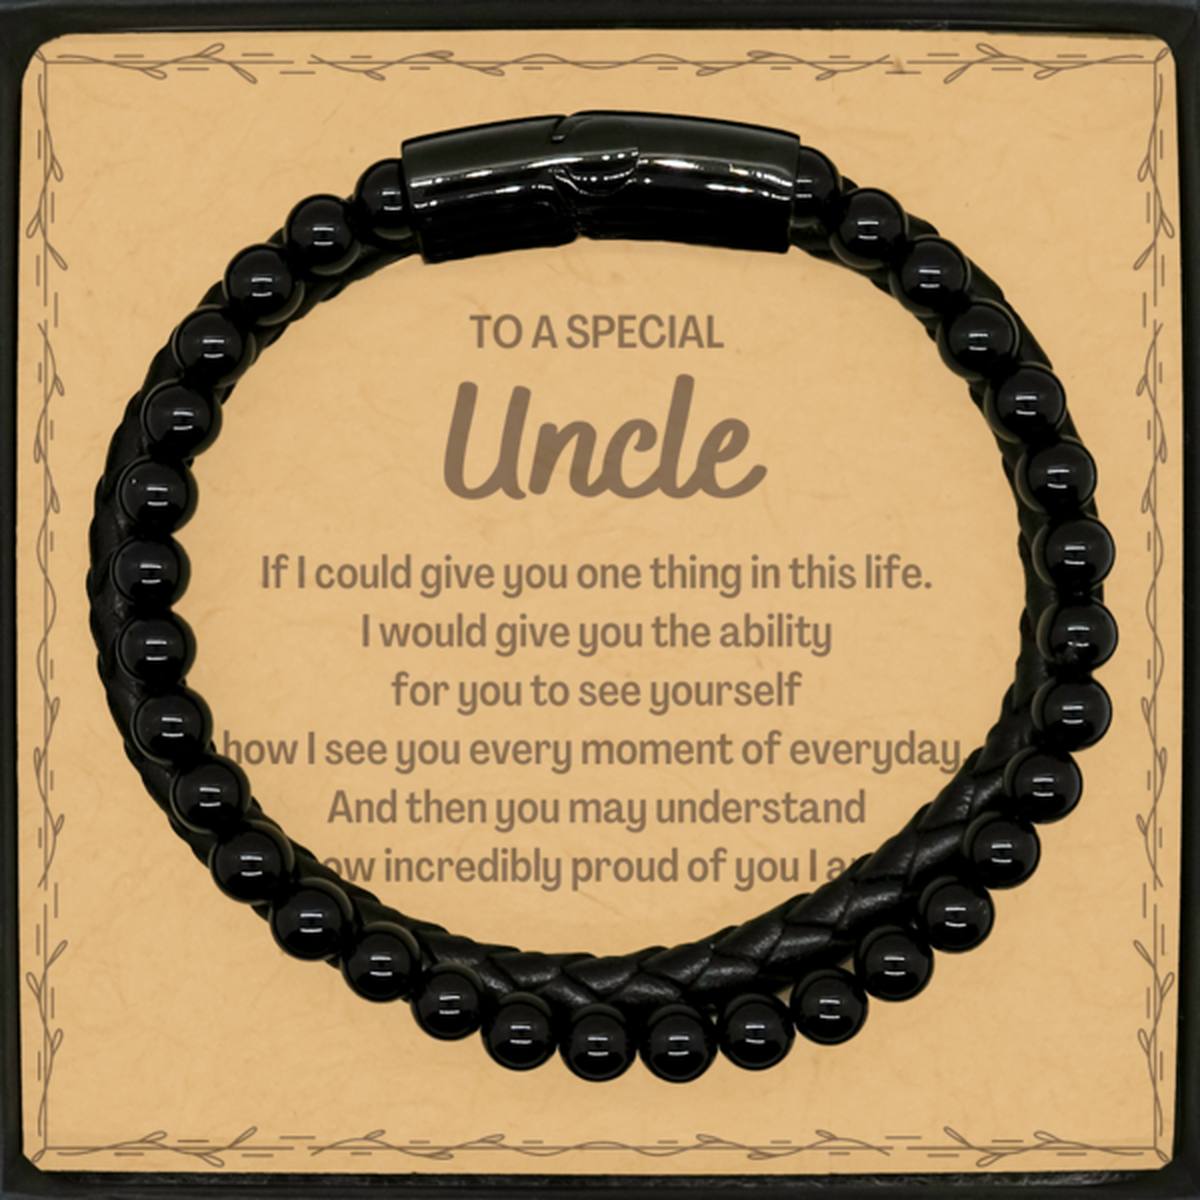 To My Uncle Stone Leather Bracelets, Gifts For Uncle Message Card, Inspirational Gifts for Christmas Birthday, Epic Gifts for Uncle To A Special Uncle how incredibly proud of you I am